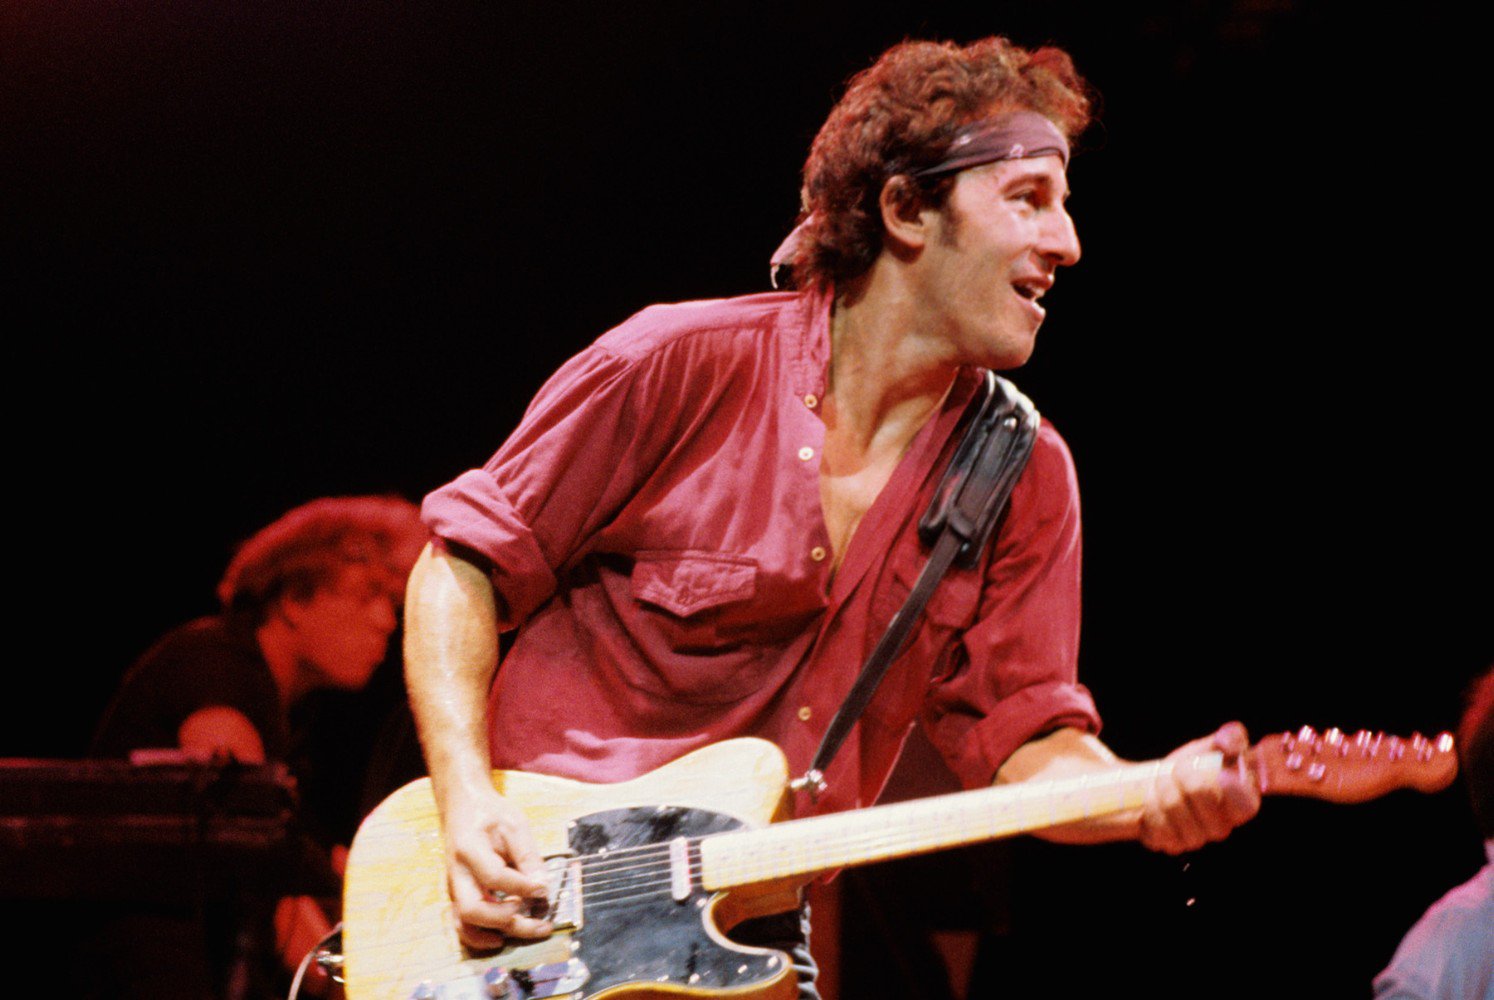 Happy Birthday to Bruce Springsteen who turns 70 today! 